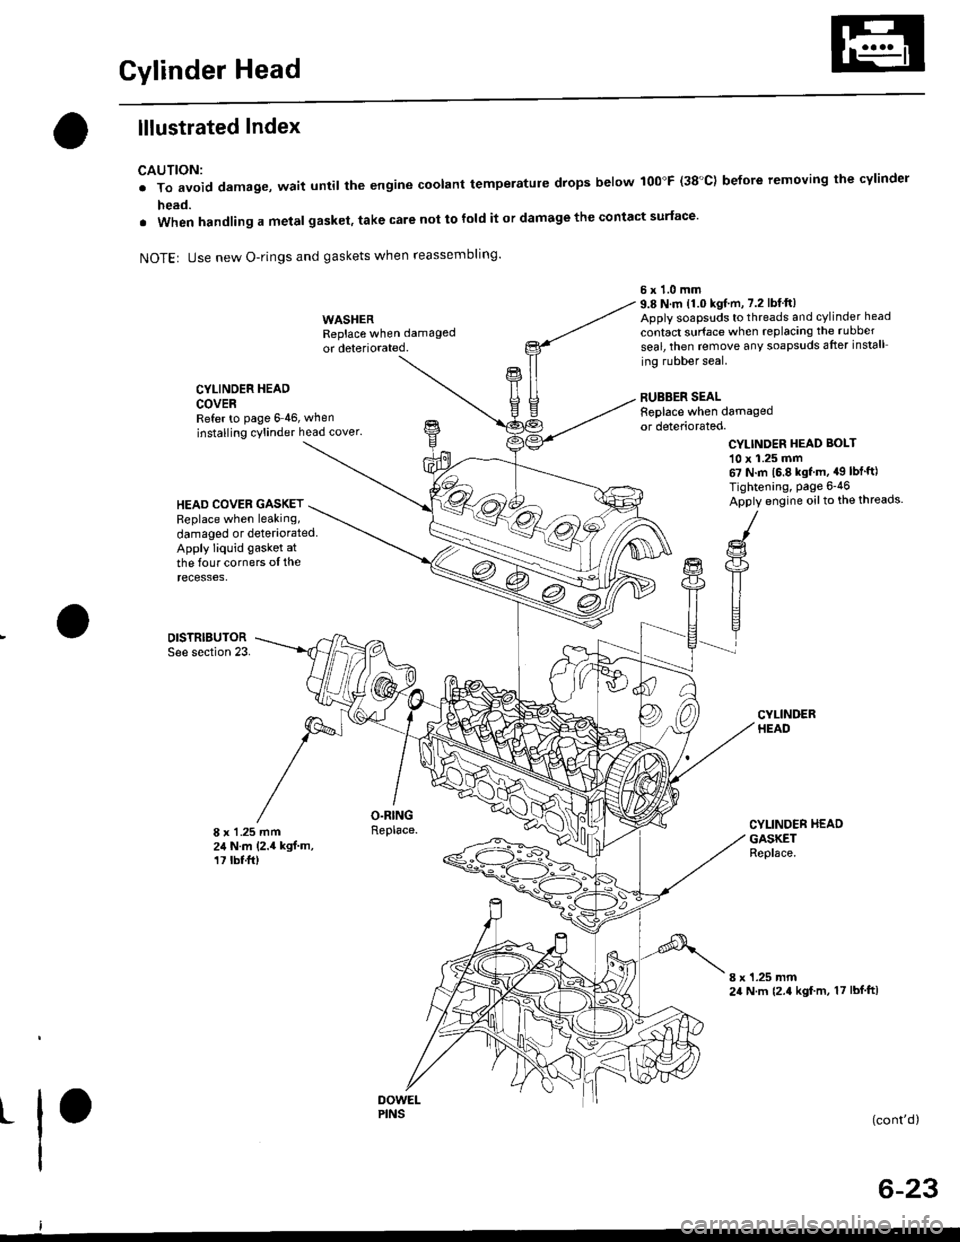 HONDA CIVIC 1996 6.G Workshop Manual Gylinder Head
lllustrated Index
CAUTION:
. To avoid damage, wait until the engine coolant temperatule drops below 100"F (38C) before removing the cylinder
head.
. When handling a metal gasket, take c